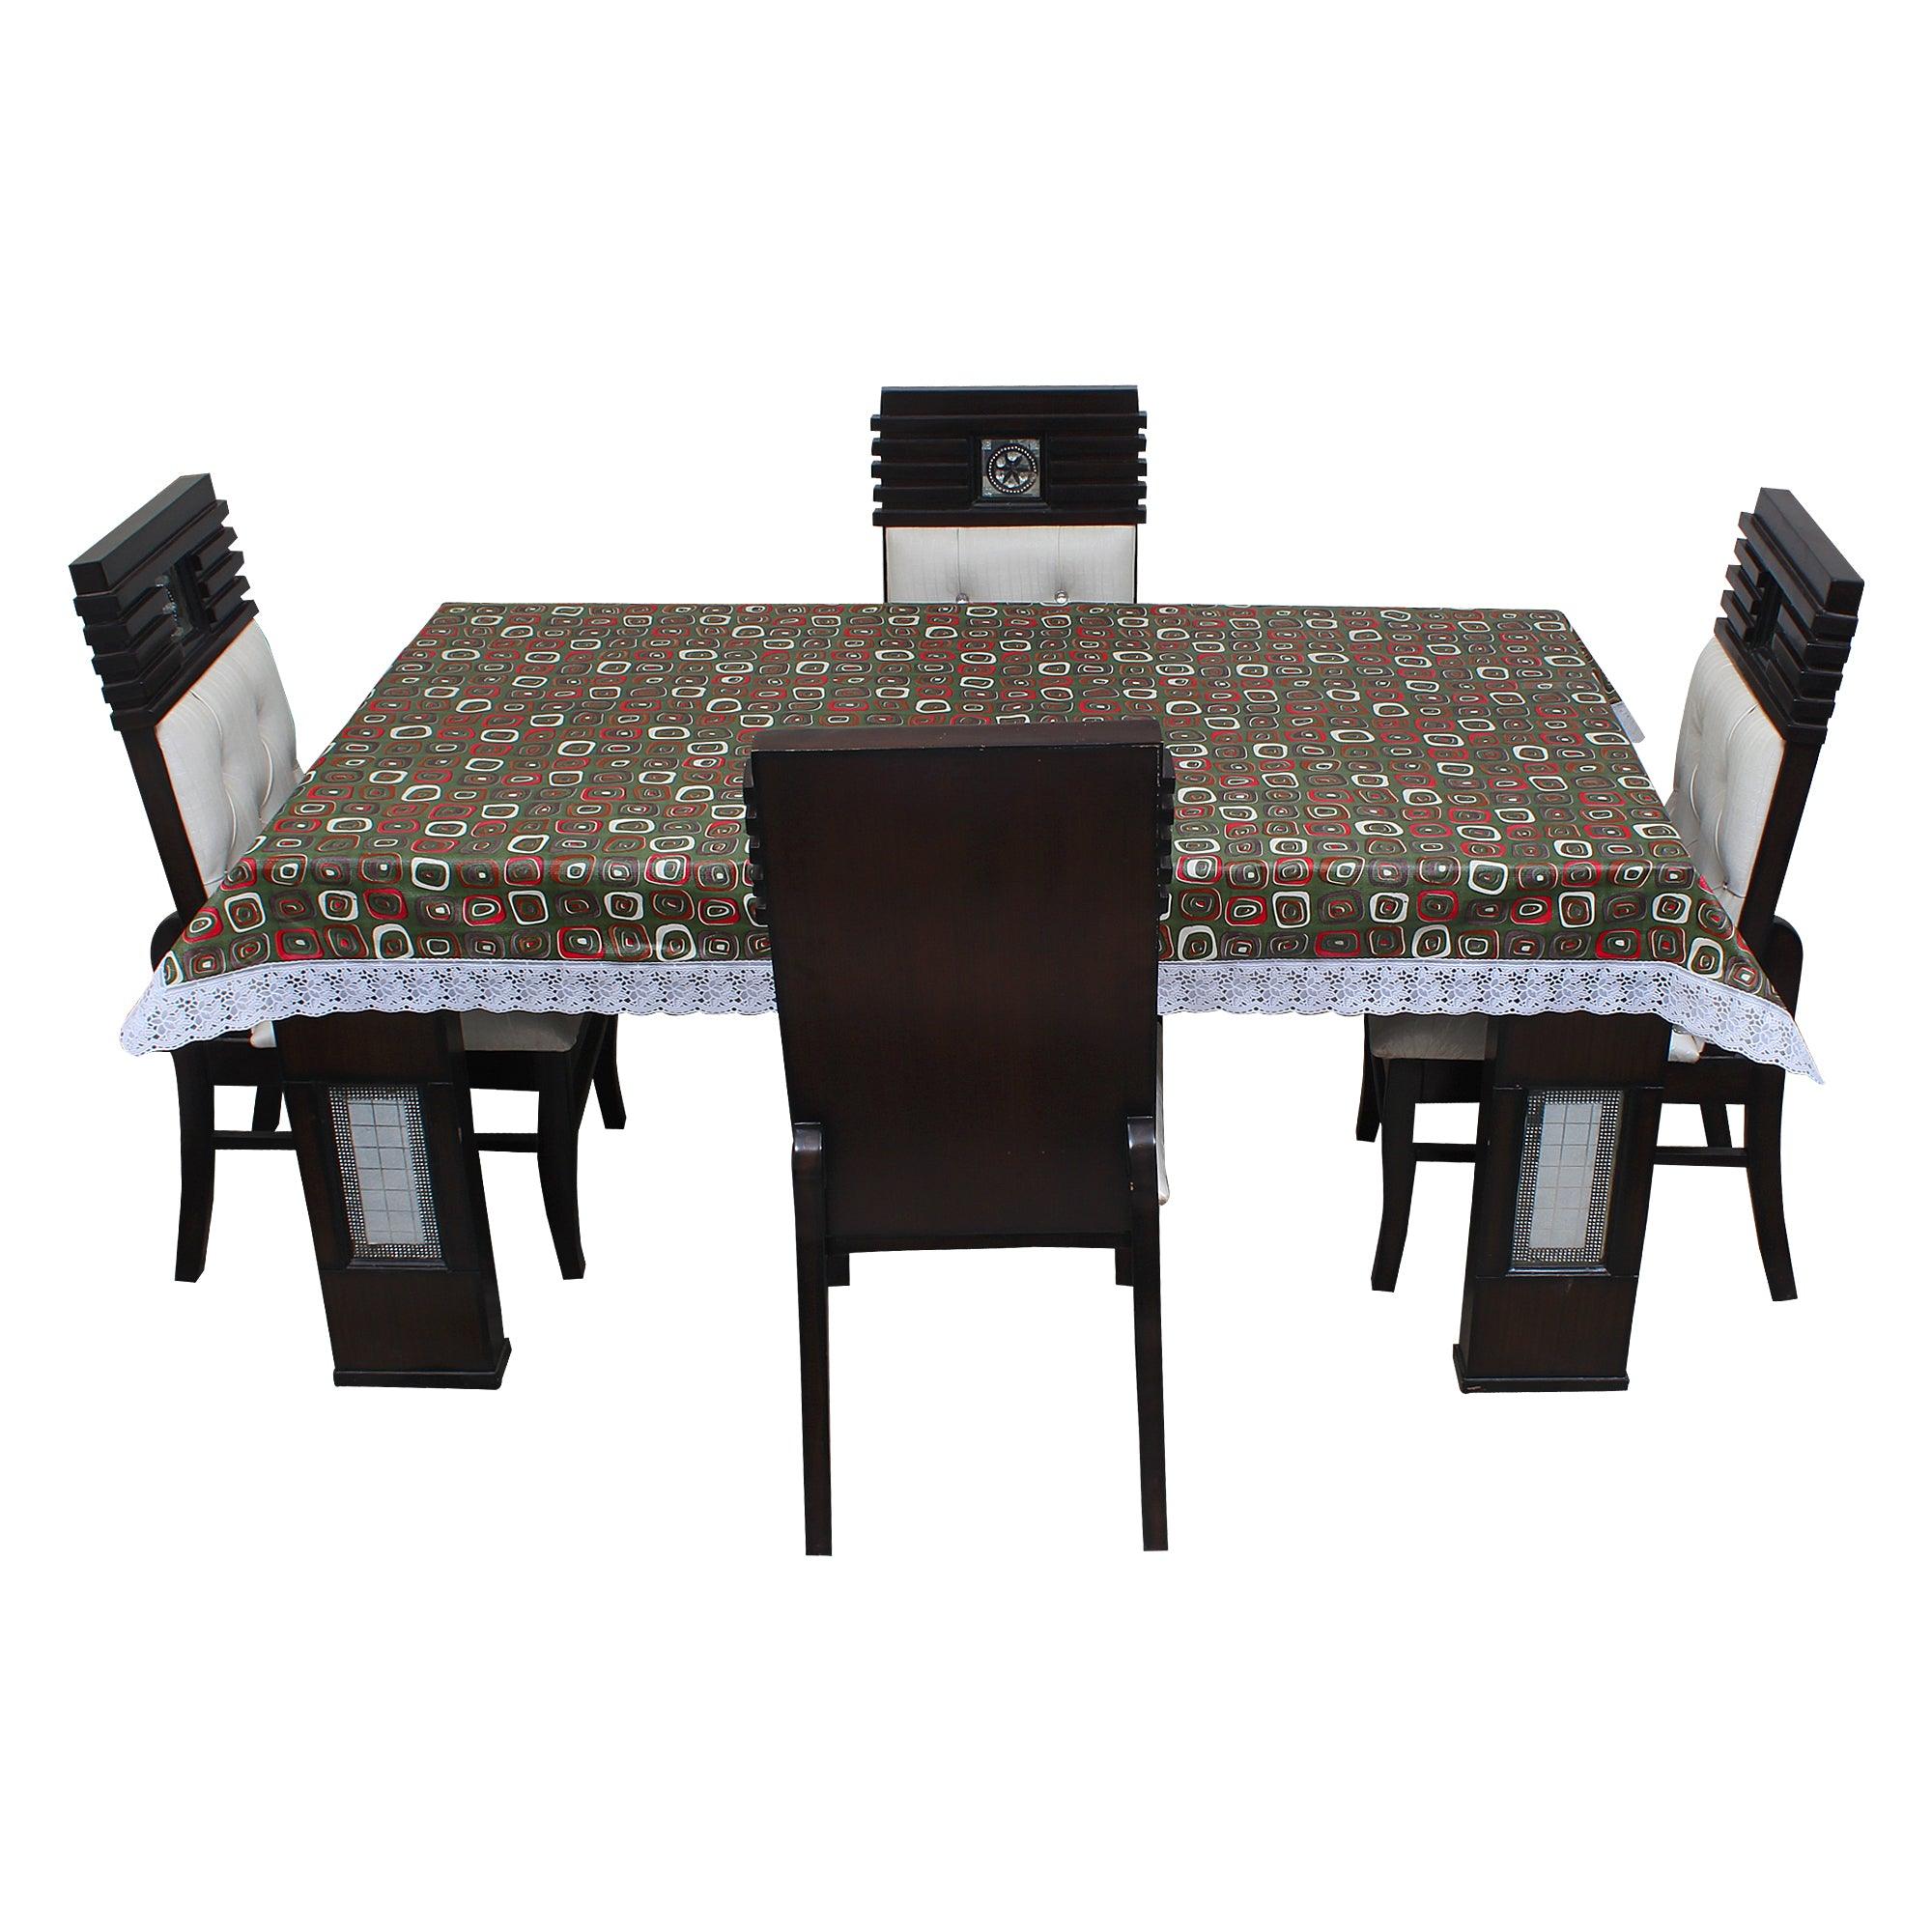 Waterproof and Dustproof Dining Table Cover, SA63 - Dream Care Furnishings Private Limited